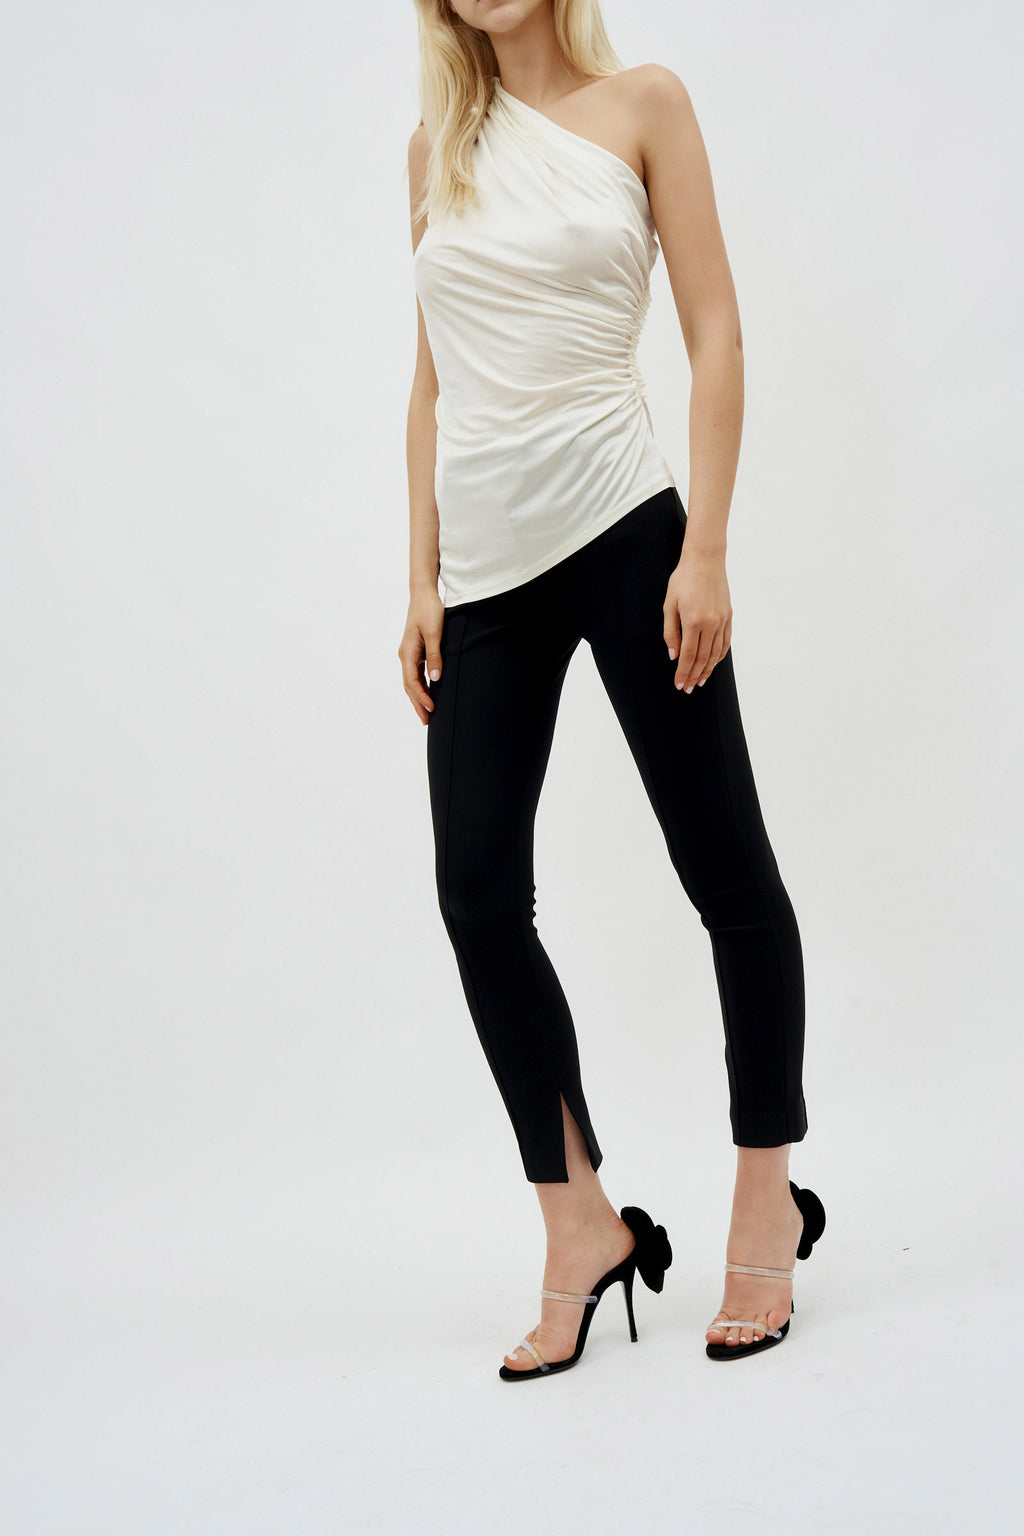 Ruched Asymmetric Off White Top